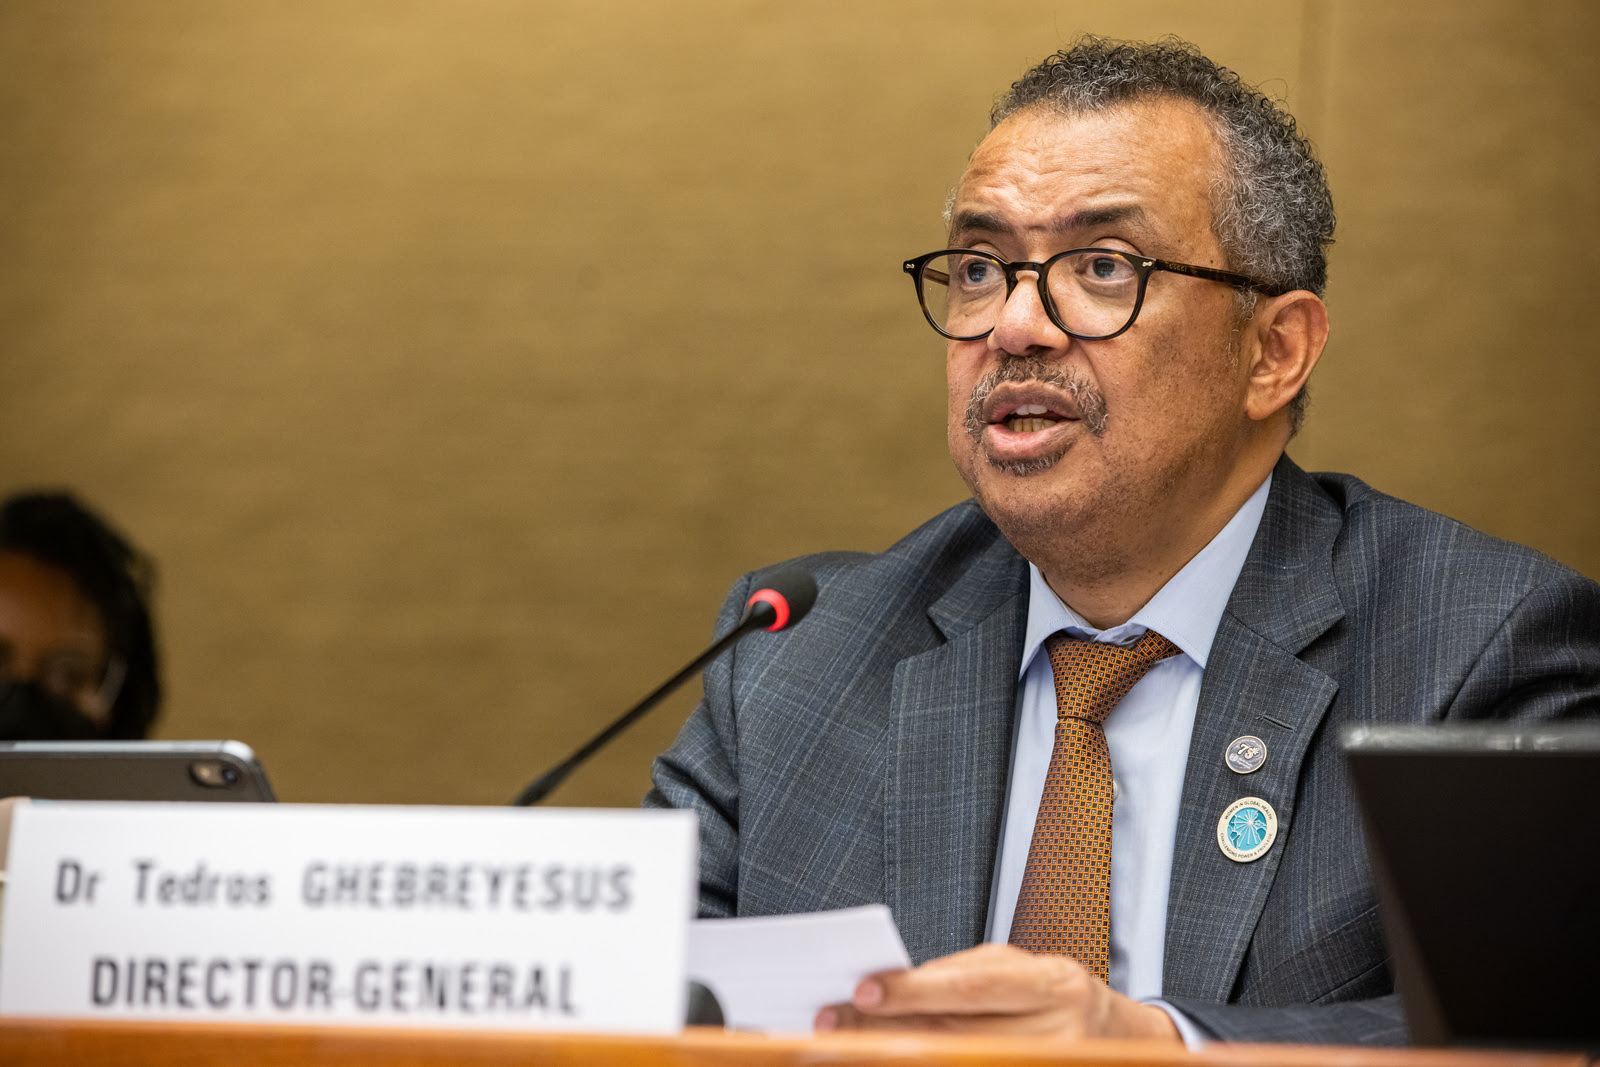 WHO Director-General Dr. Tedros Adhanom Ghebreyesus speaks at a strategic roundtable at the World Health Assembly.